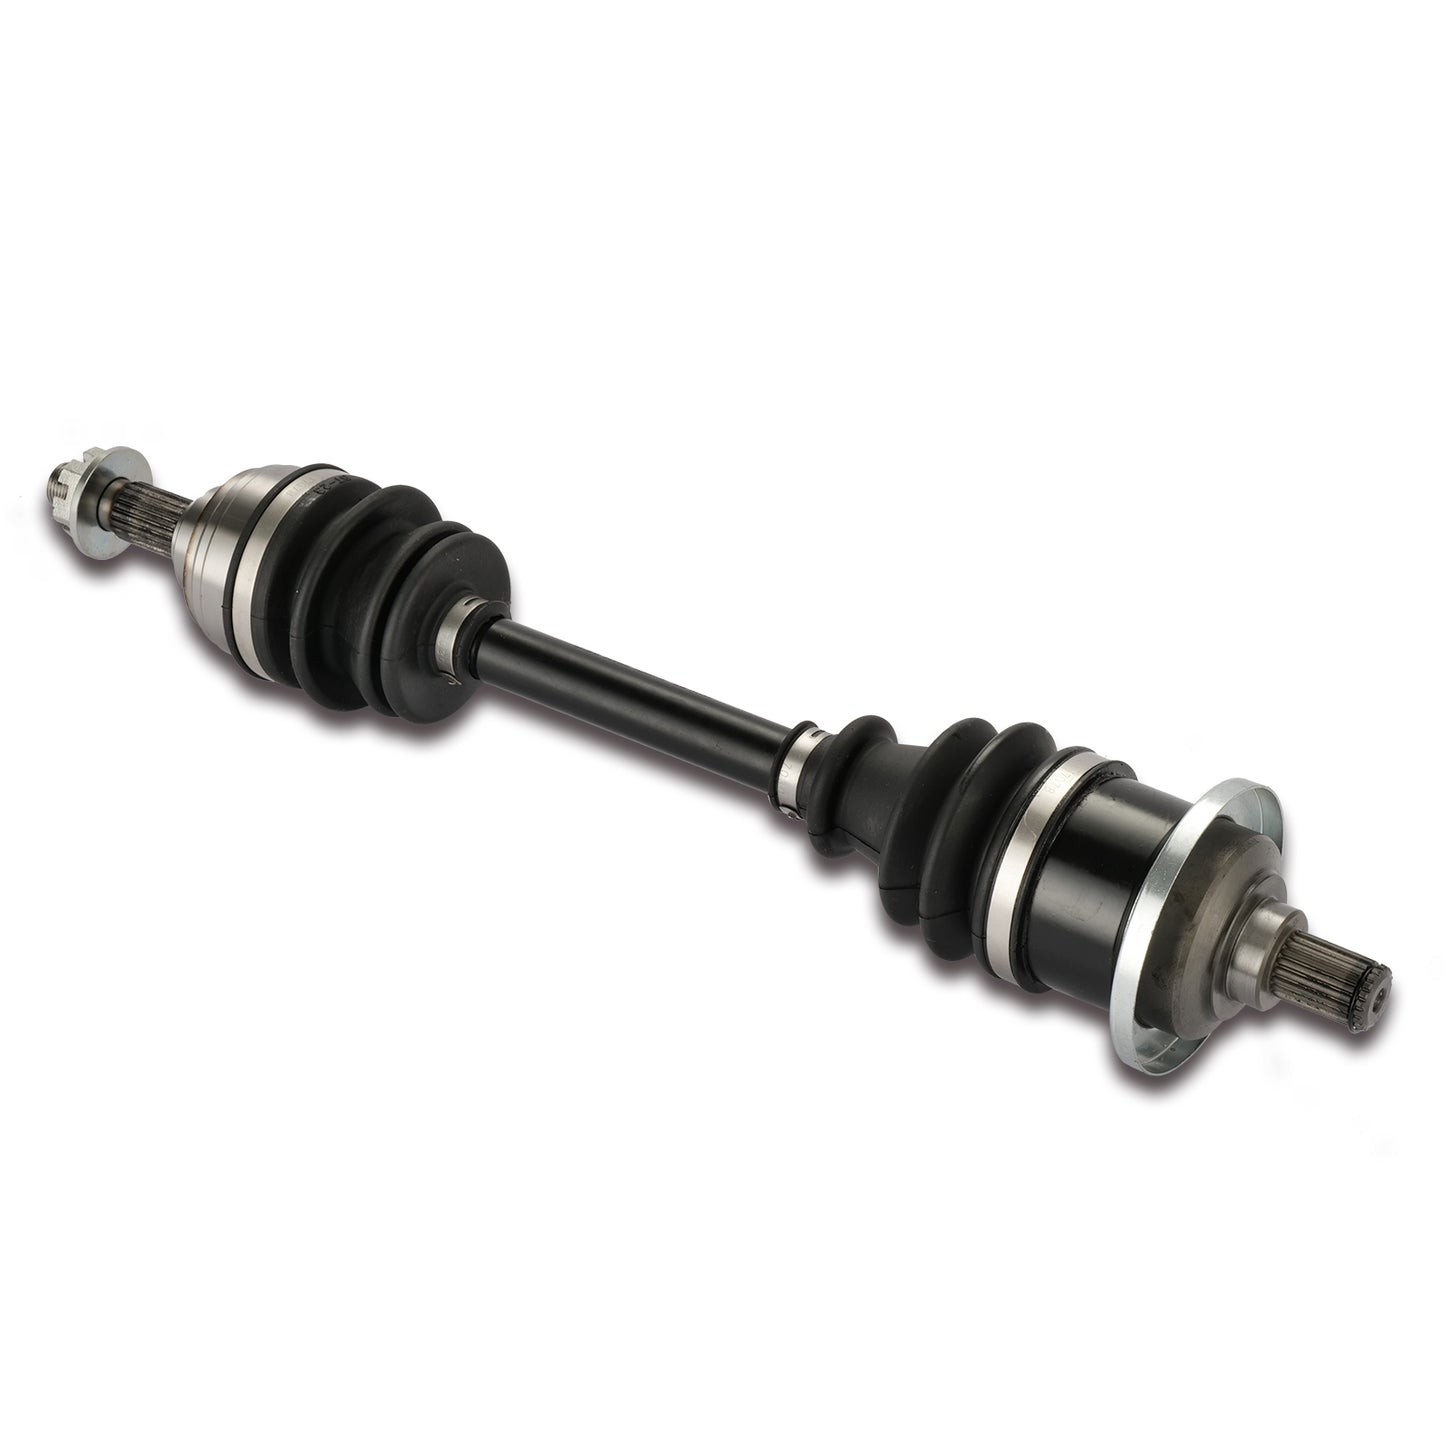 2 CAM-AC305 Front Left Drive Shaft CV Axle Compatible with ARTIC CAT (2002-2004) 250 BF / (2002-2004) 300 BF / (2002) 500 TBX LF 0402-365,0402-987,1502-528,1502-530